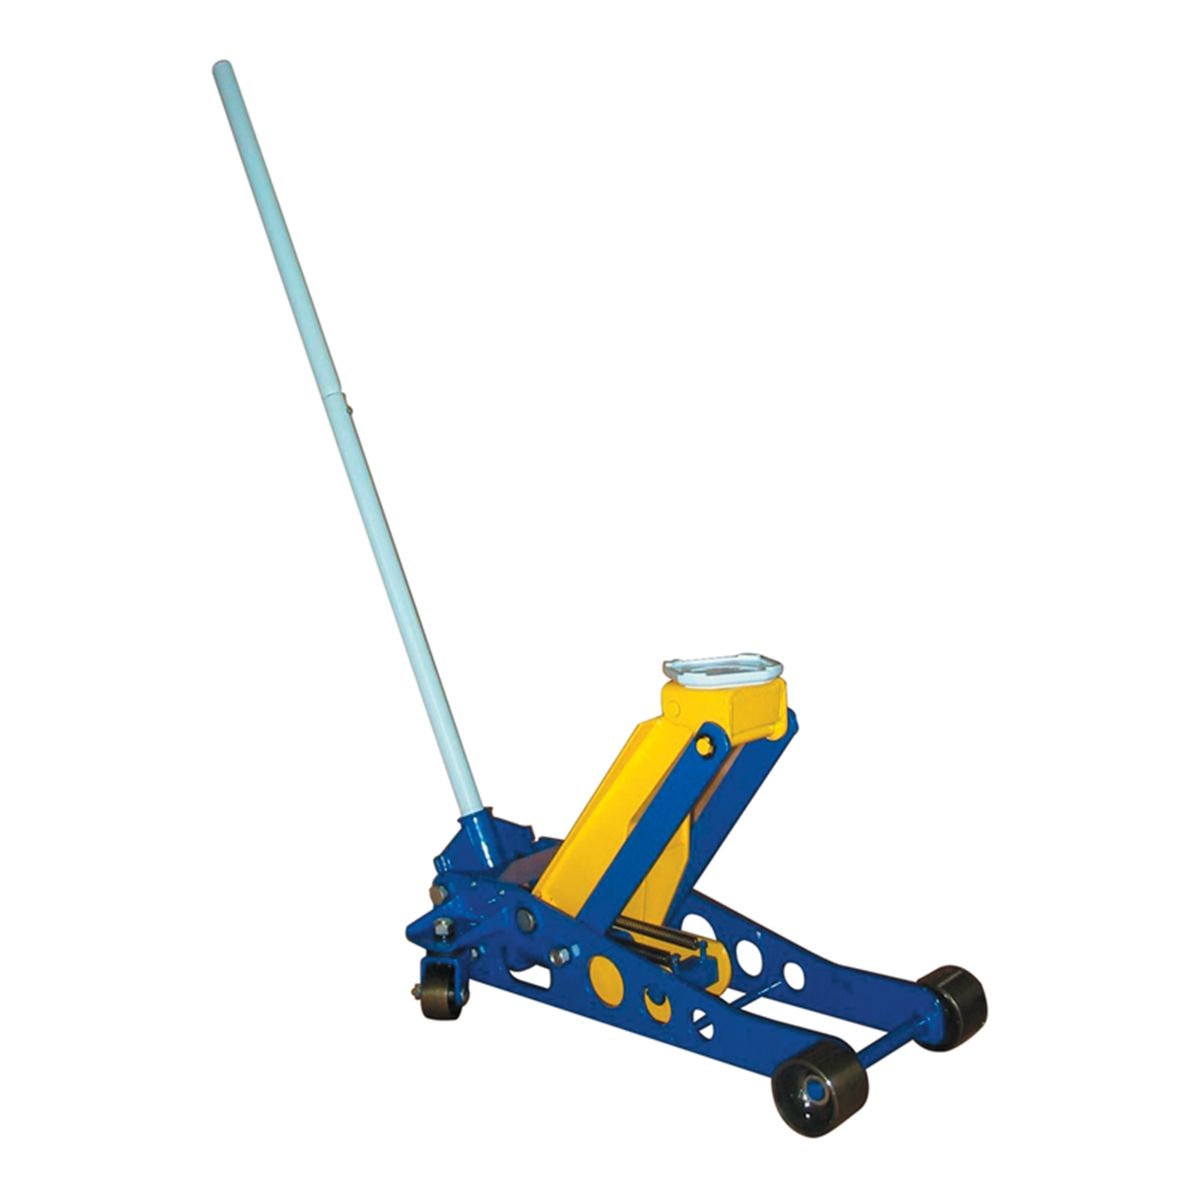 Double Plunger Hydraulic Service Jack - 2-1/2 Ton